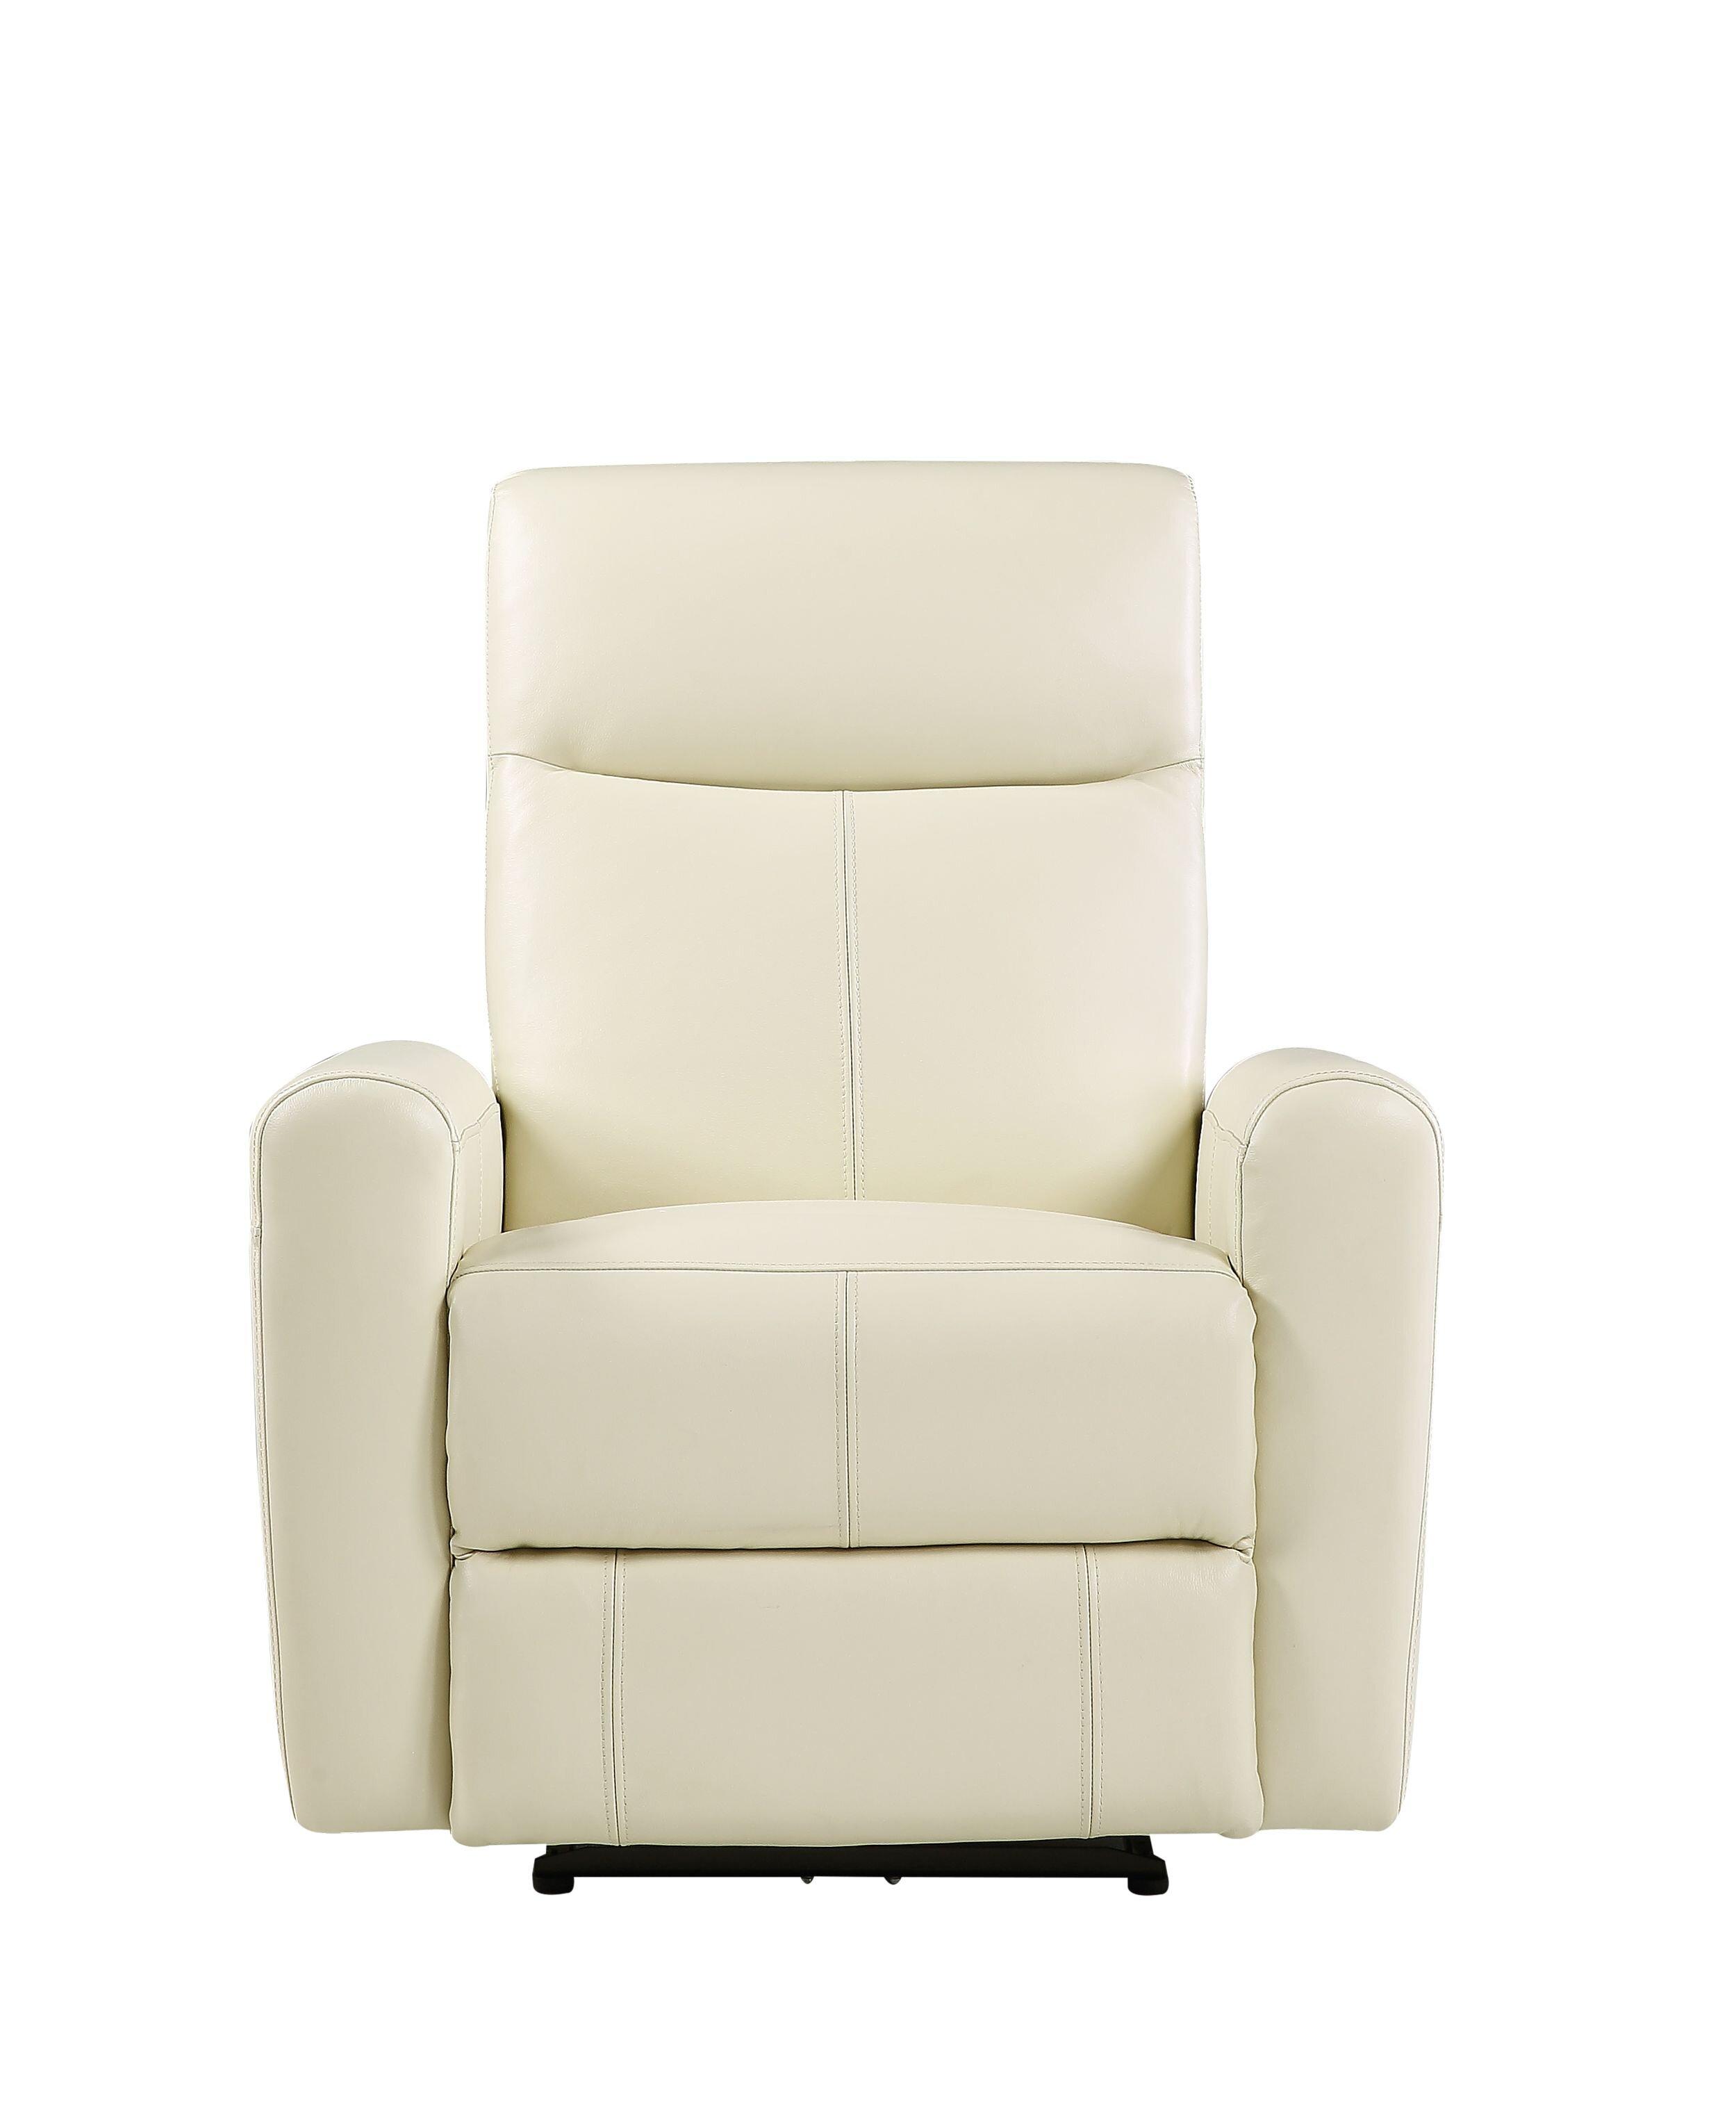 

                    
Acme Furniture Blane Recliner Beige Top grain leather Purchase 
